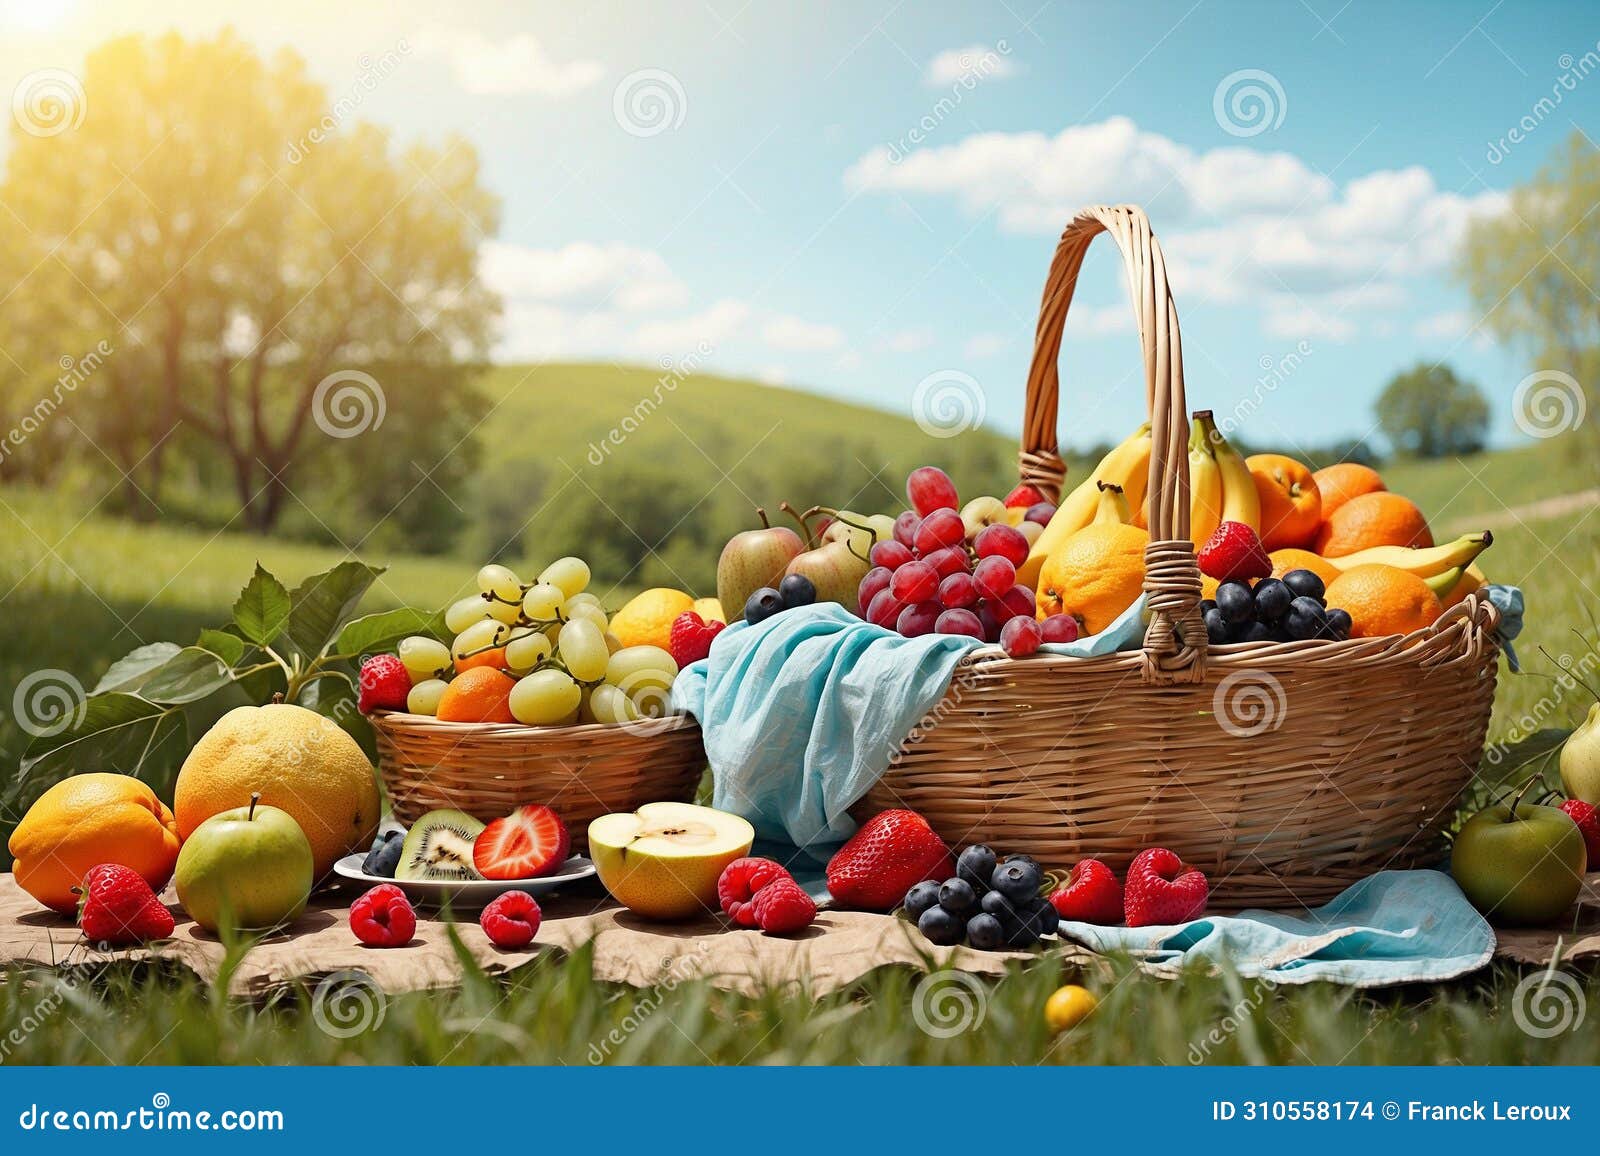 painting of a picnic basket, fruits and various dishes